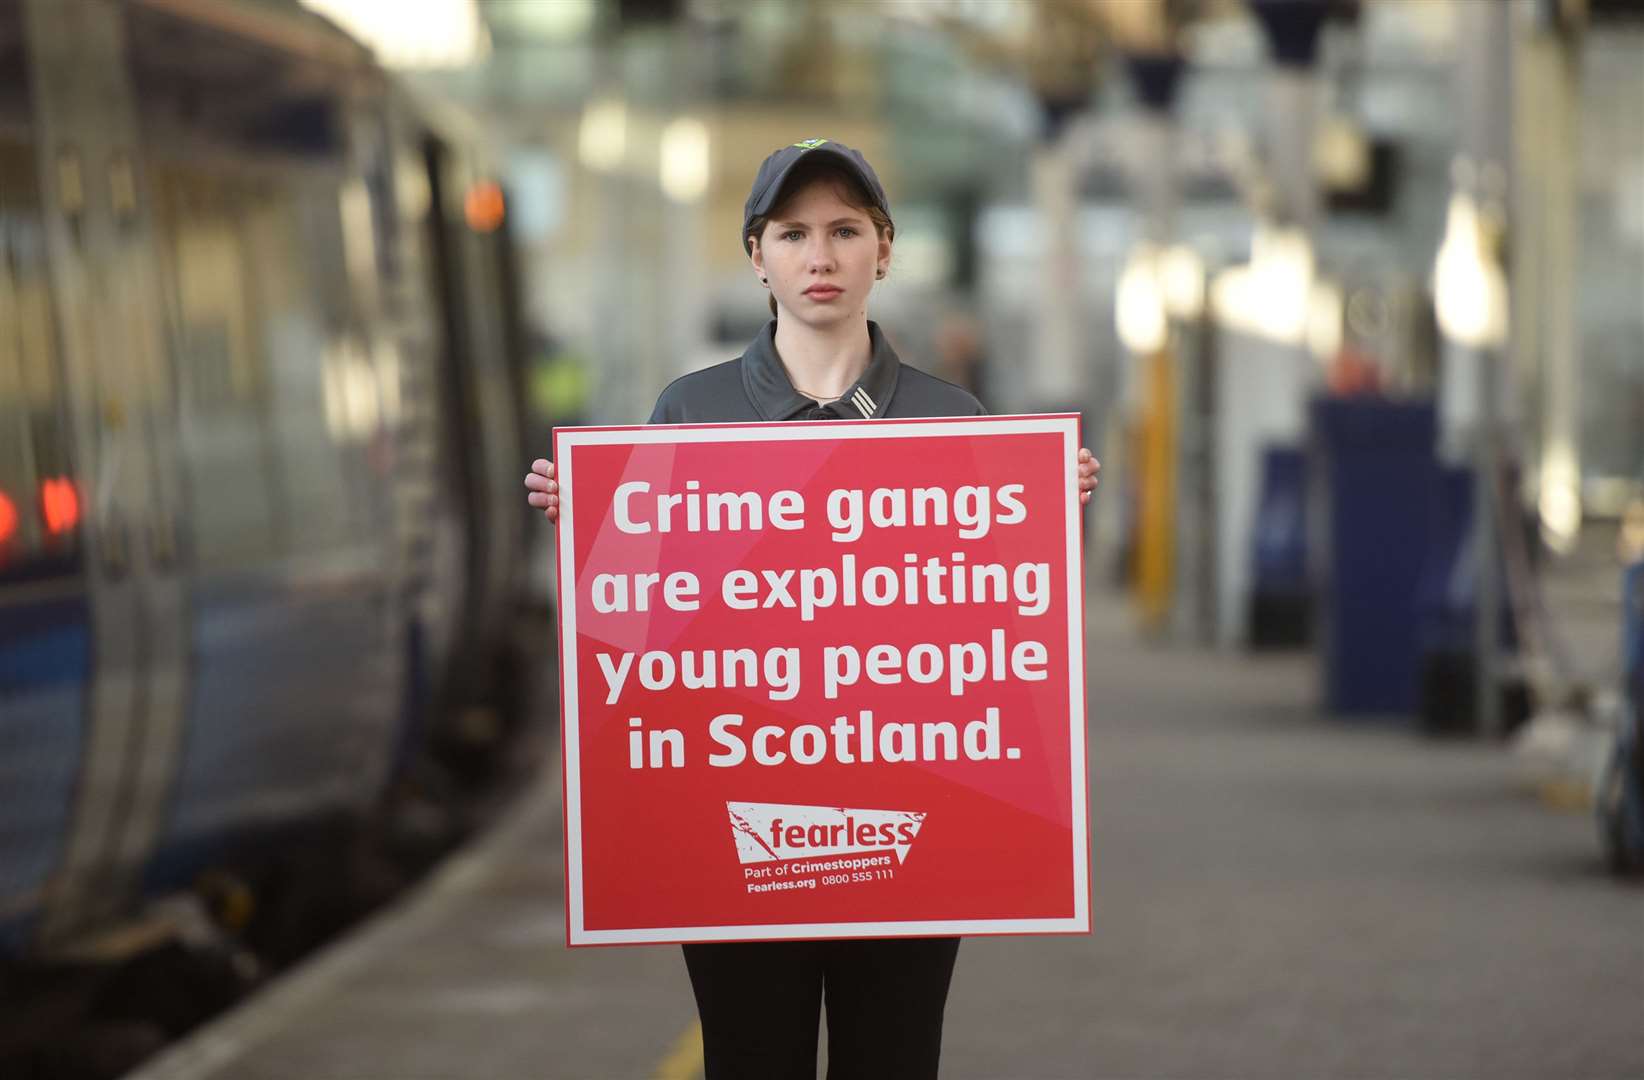 Police Scotland Youth Volunteers (PSYV) Carys Stewart, at Aberdeen Train Station promoting Fearless and Crimestoppers County Lines Campaign.